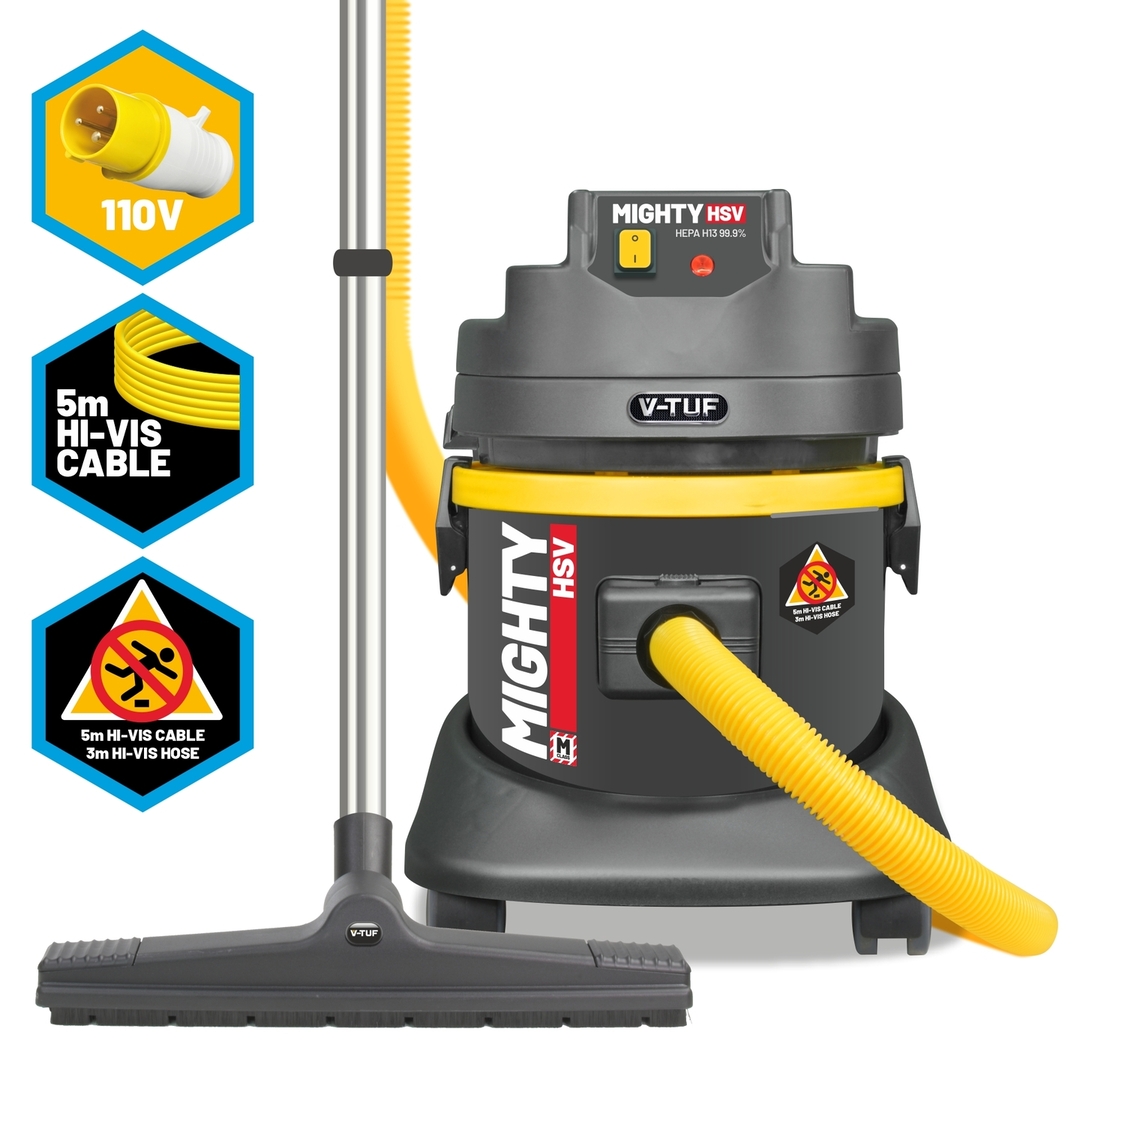 V-TUF MIGHTY HSV - 21L M-Class 110v Industrial Dust Extraction Vacuum Cleaner - Health & Safety Version 